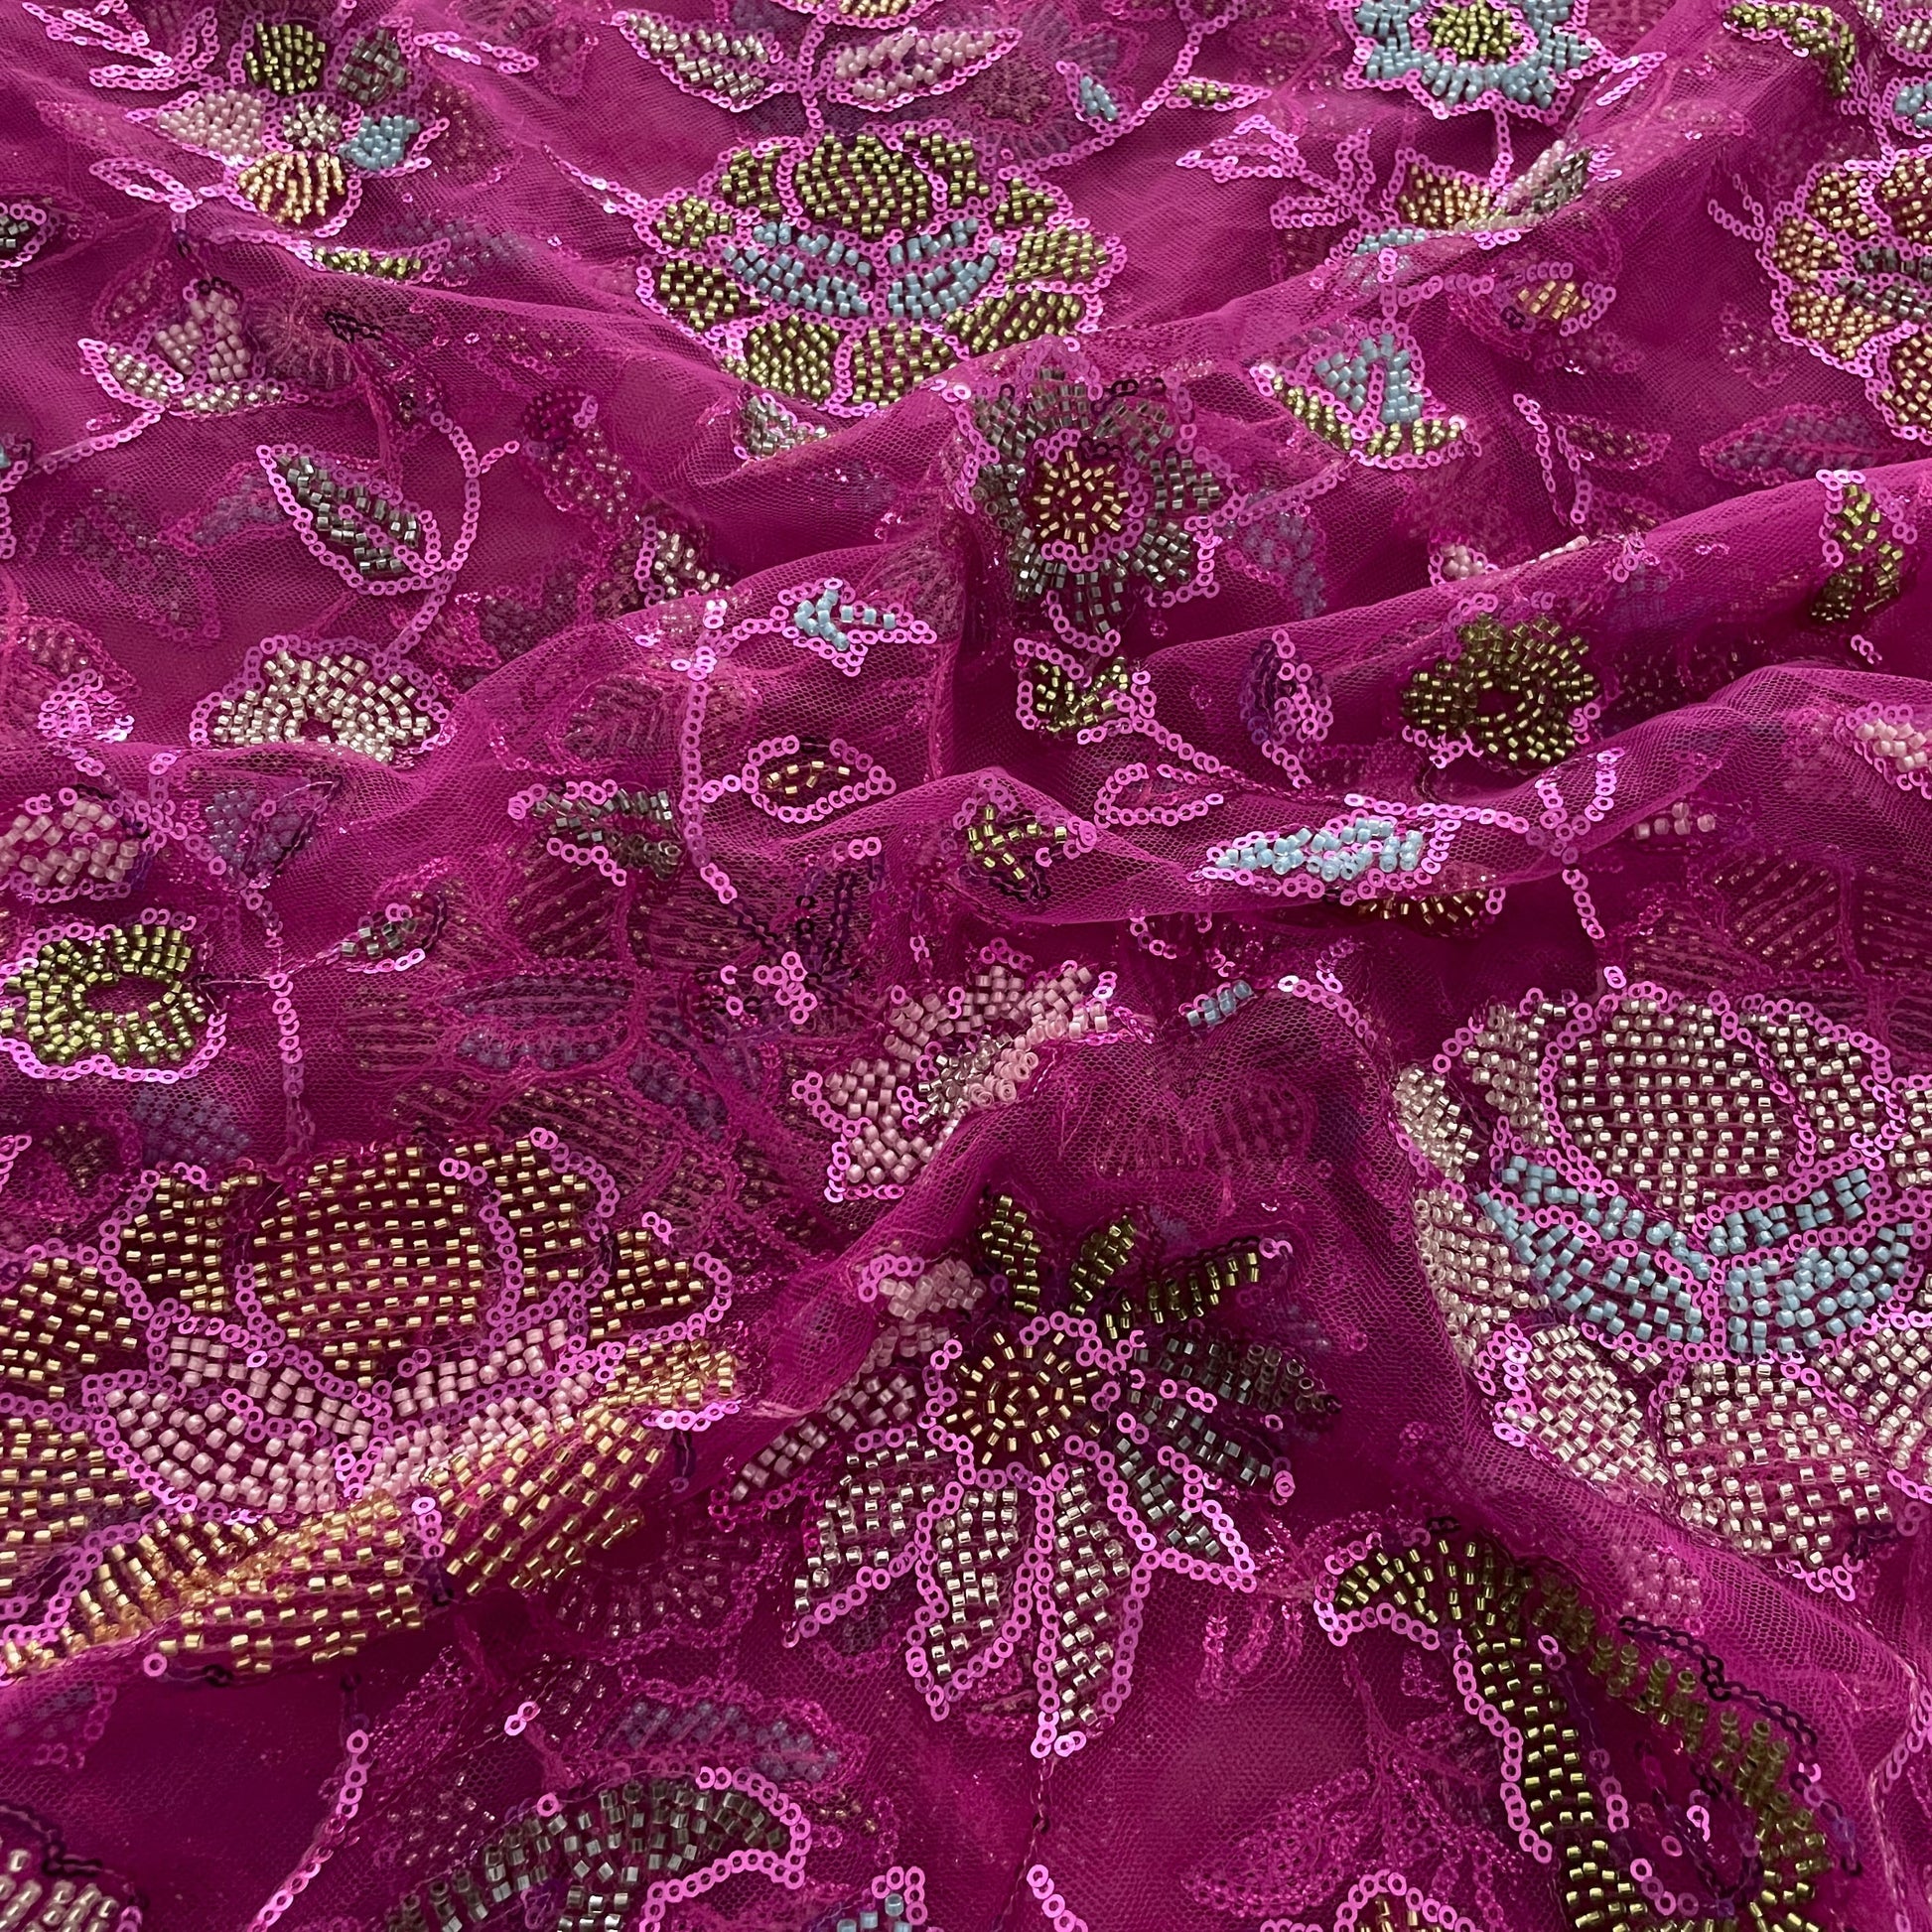 Premium Pink Floral CutDana Sequins Embroidery Net Fabric